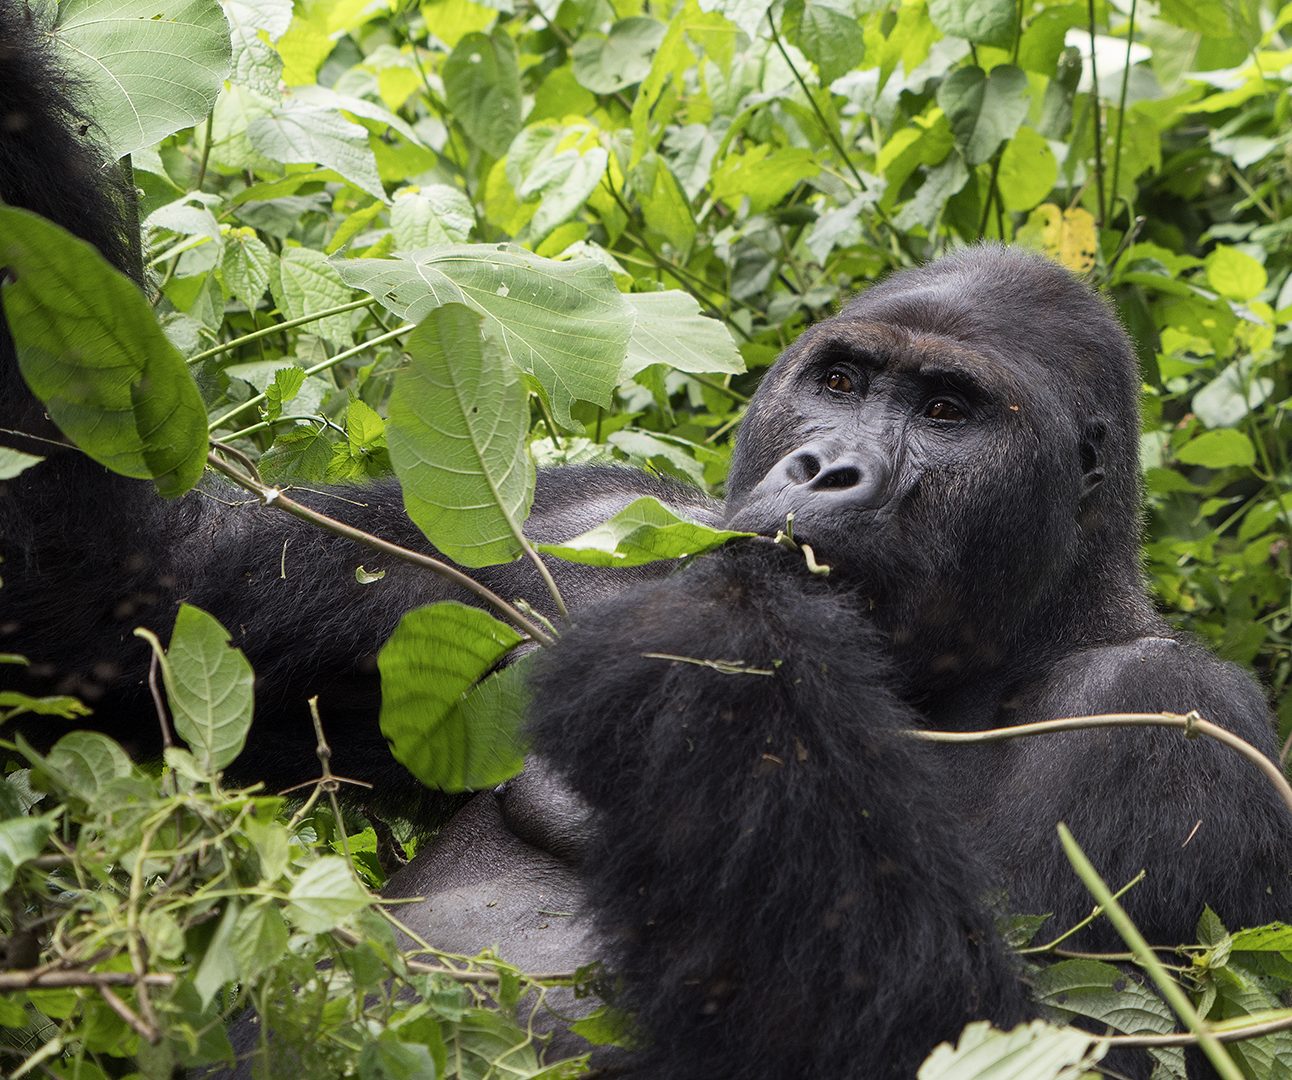 A gorilla sits in the forest eating leaves from a branch